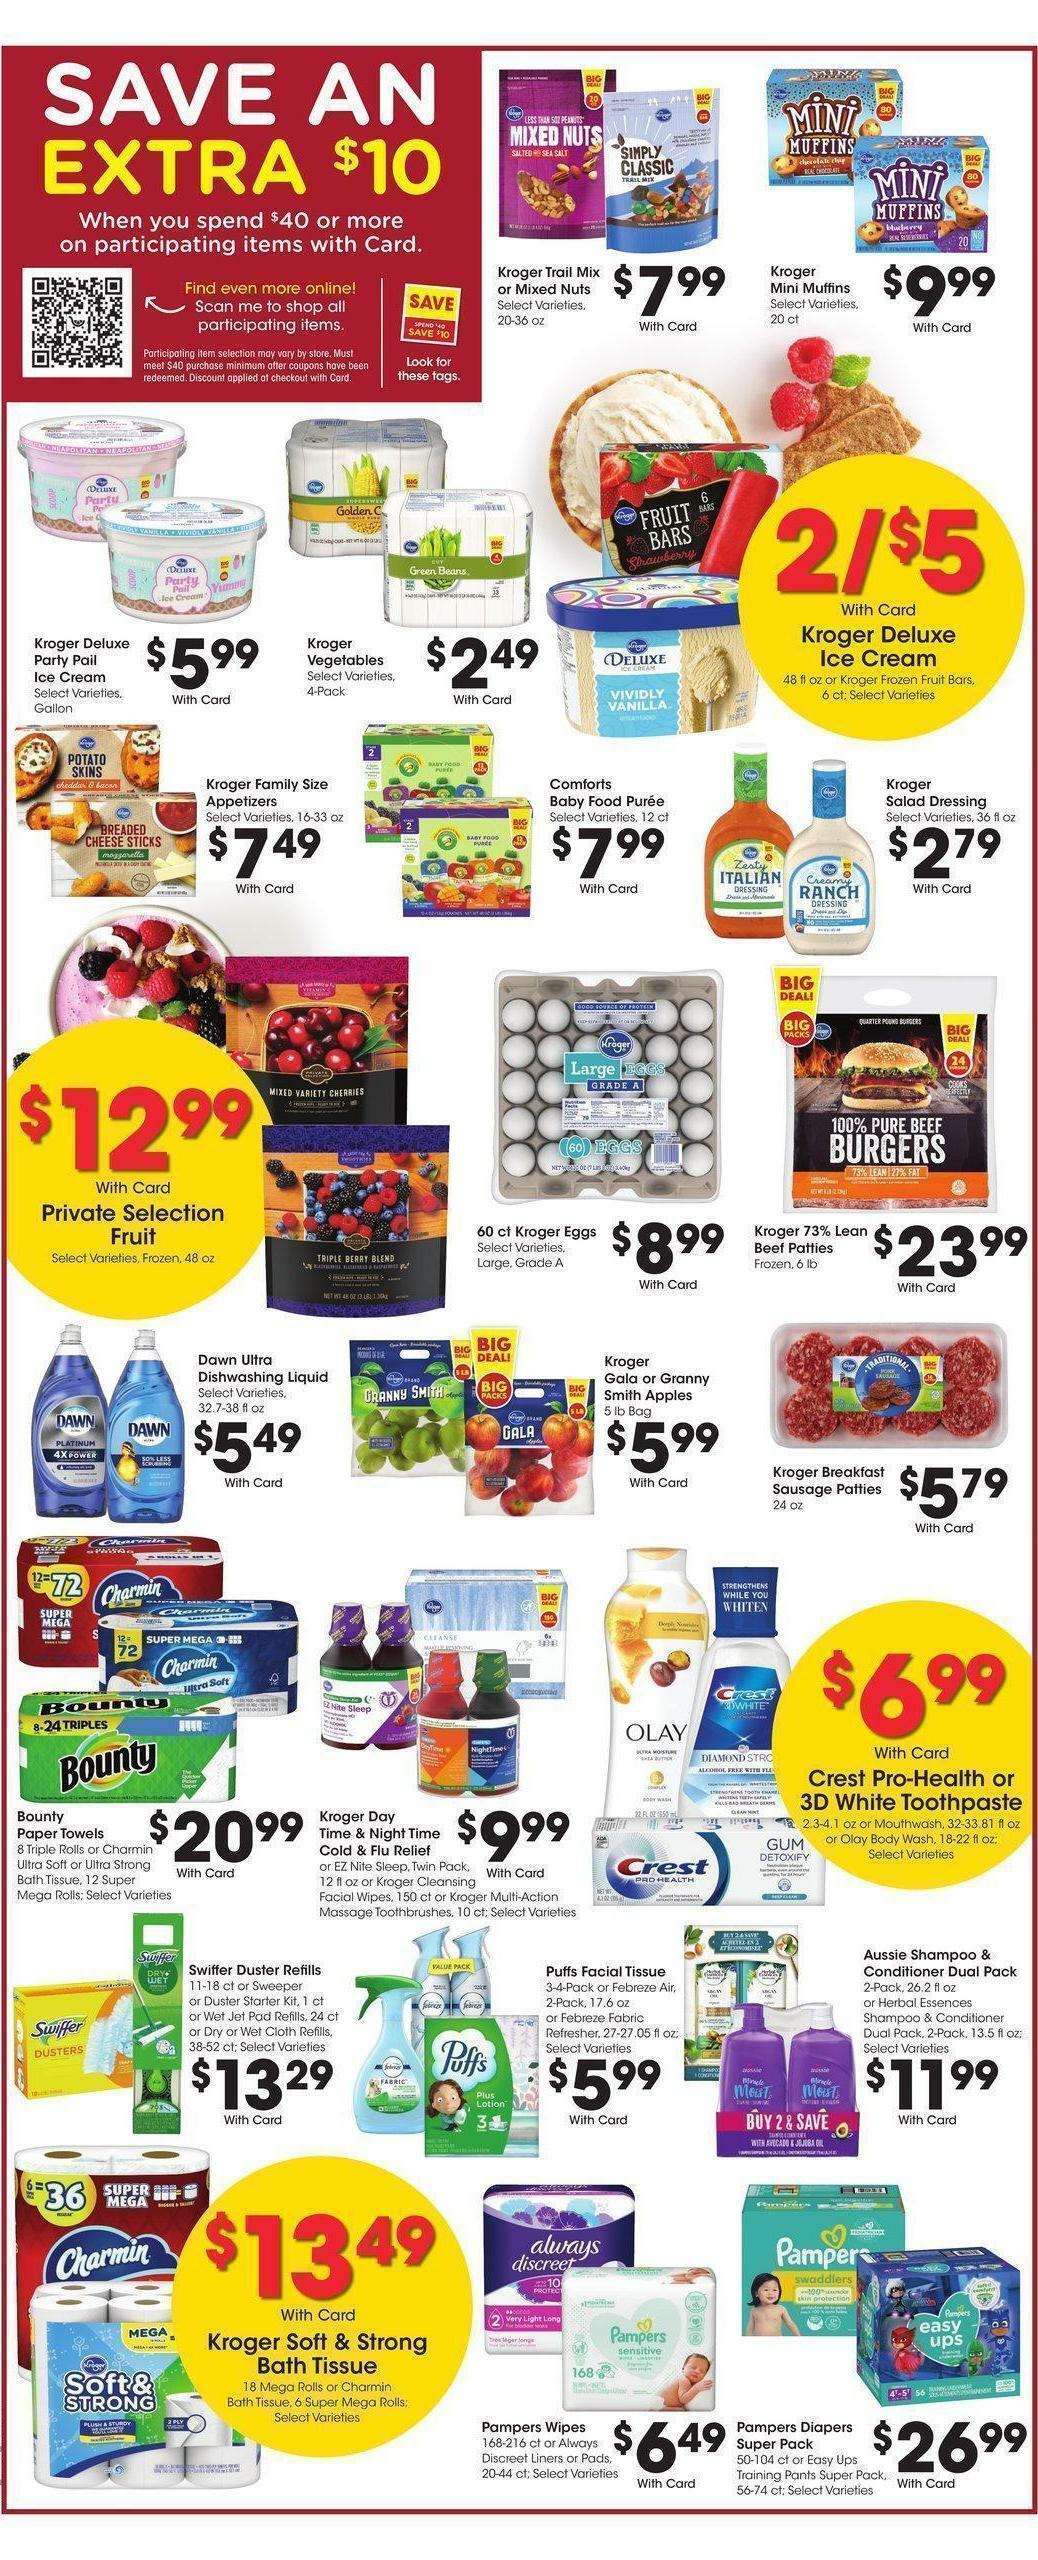 Kroger Weekly Ad from September 7